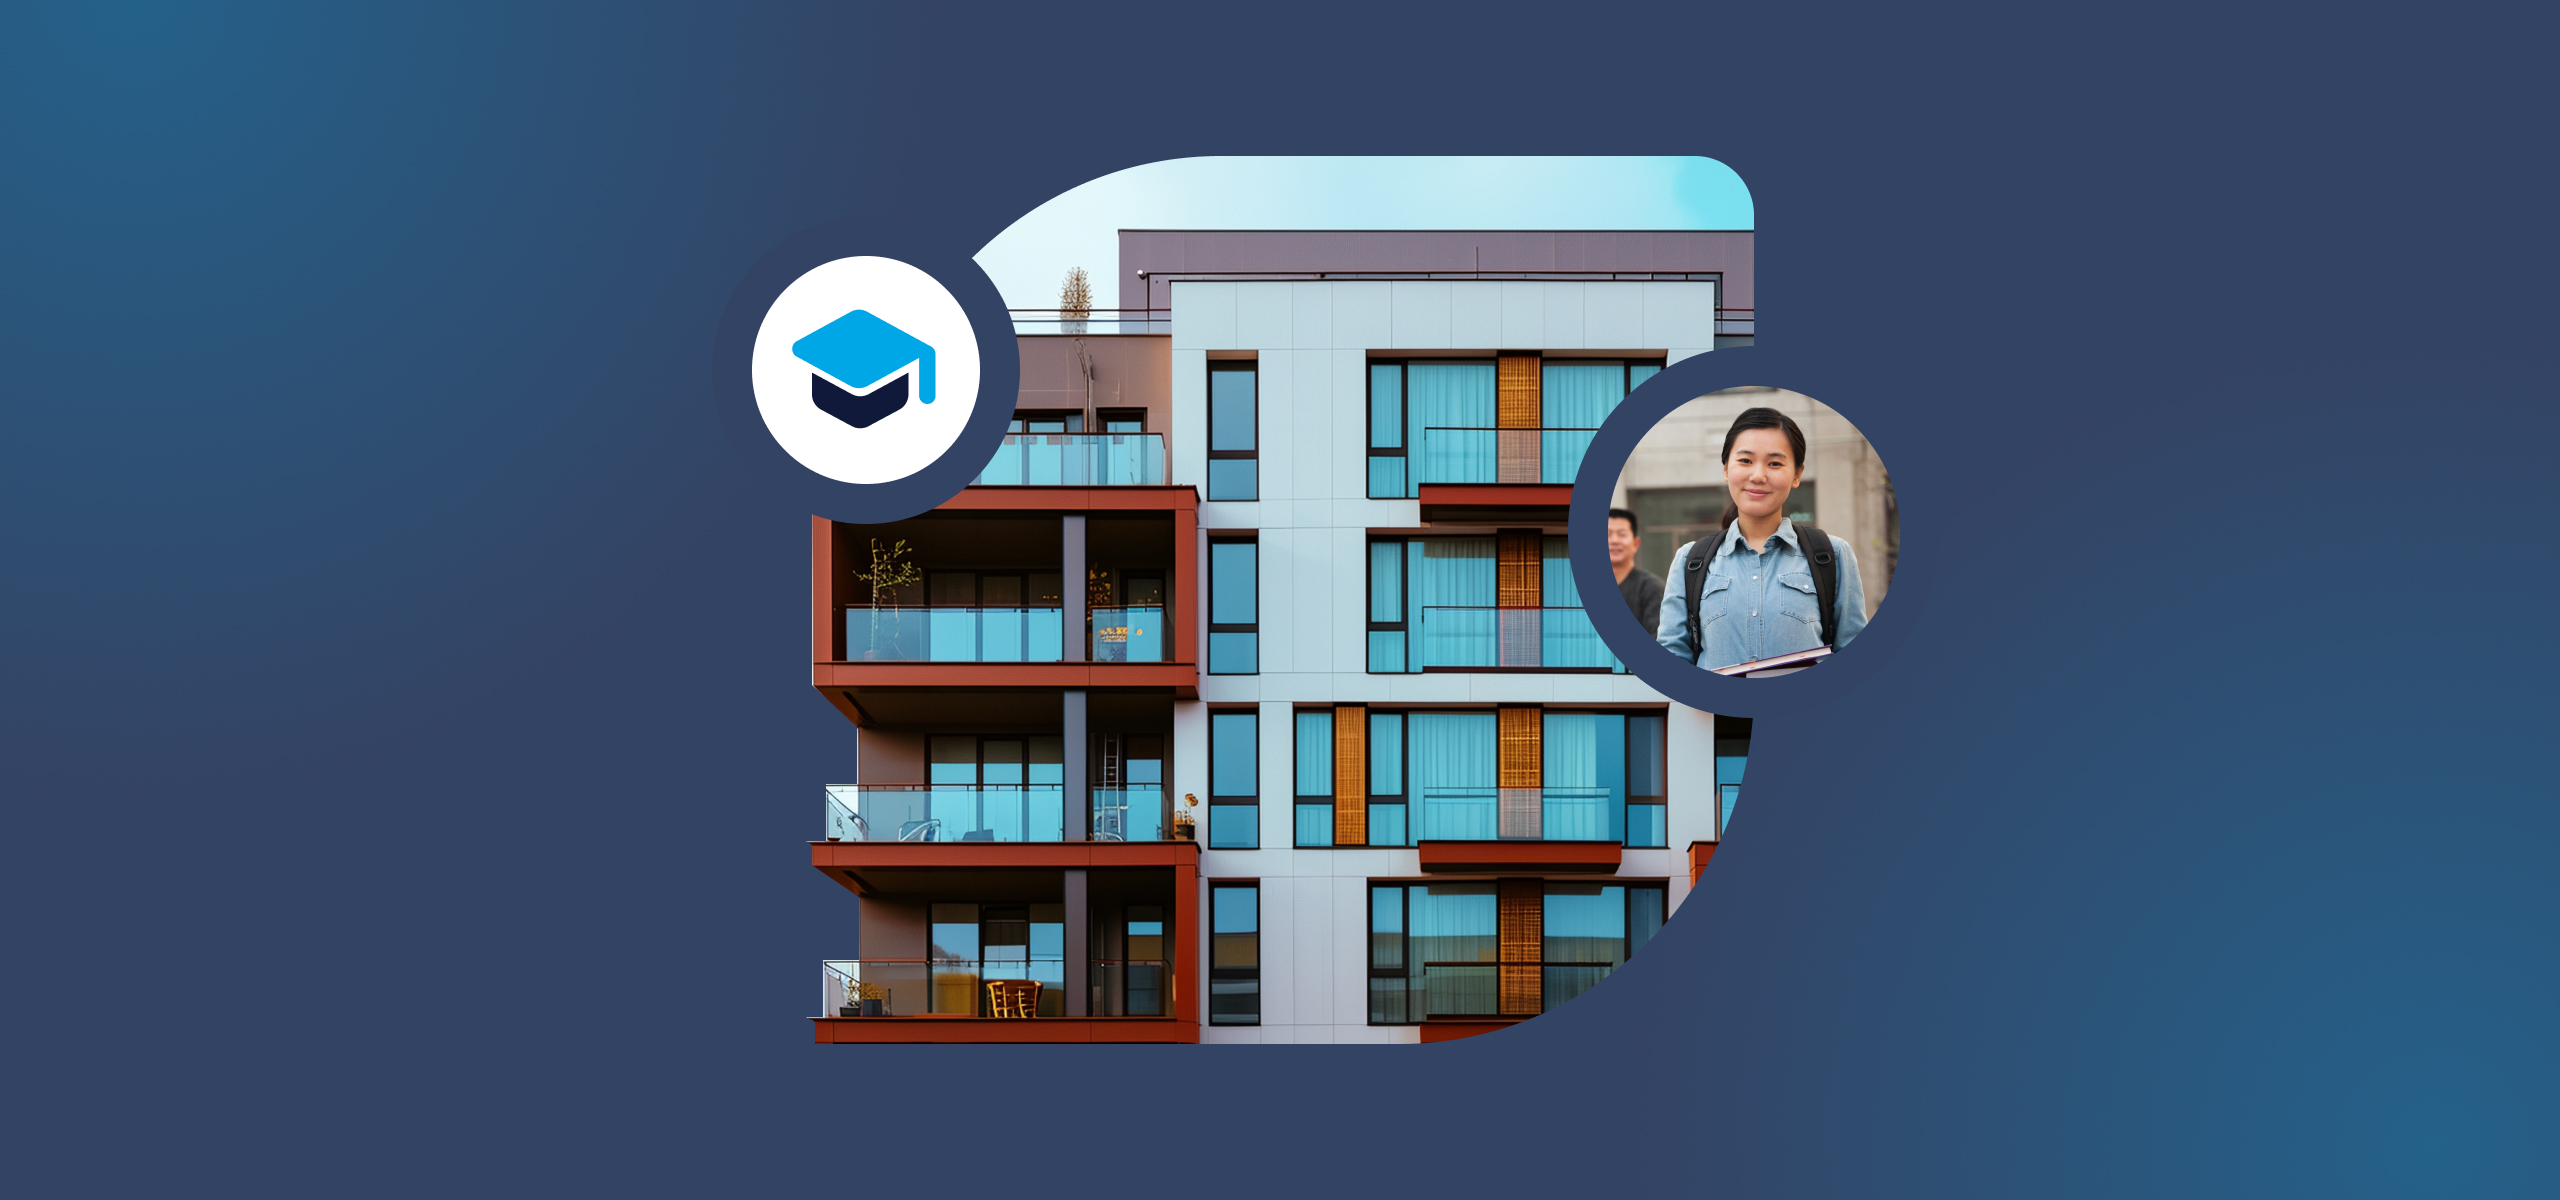 A condo building is overlayed with two small circles. One circle has an illustrated graduate cap icon and another with a student wearing a backpack